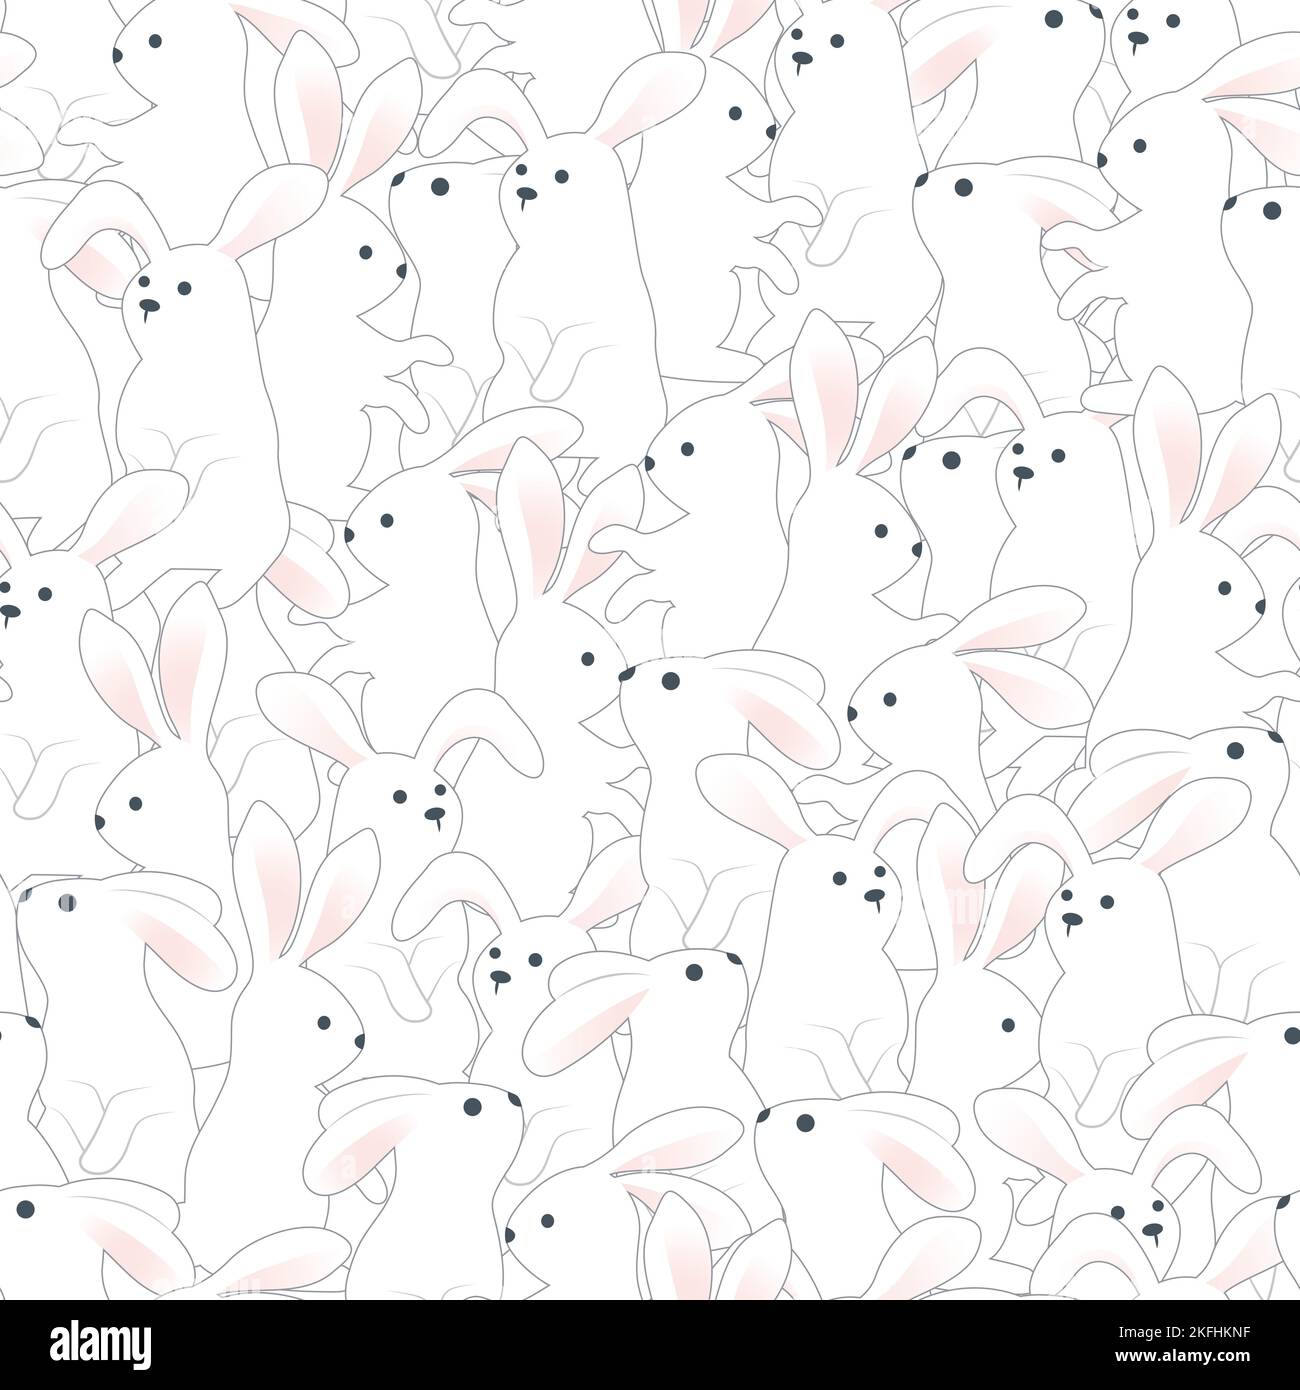 Seamless vector pattern in the form of a crowd of white rabbits. Stock Vector